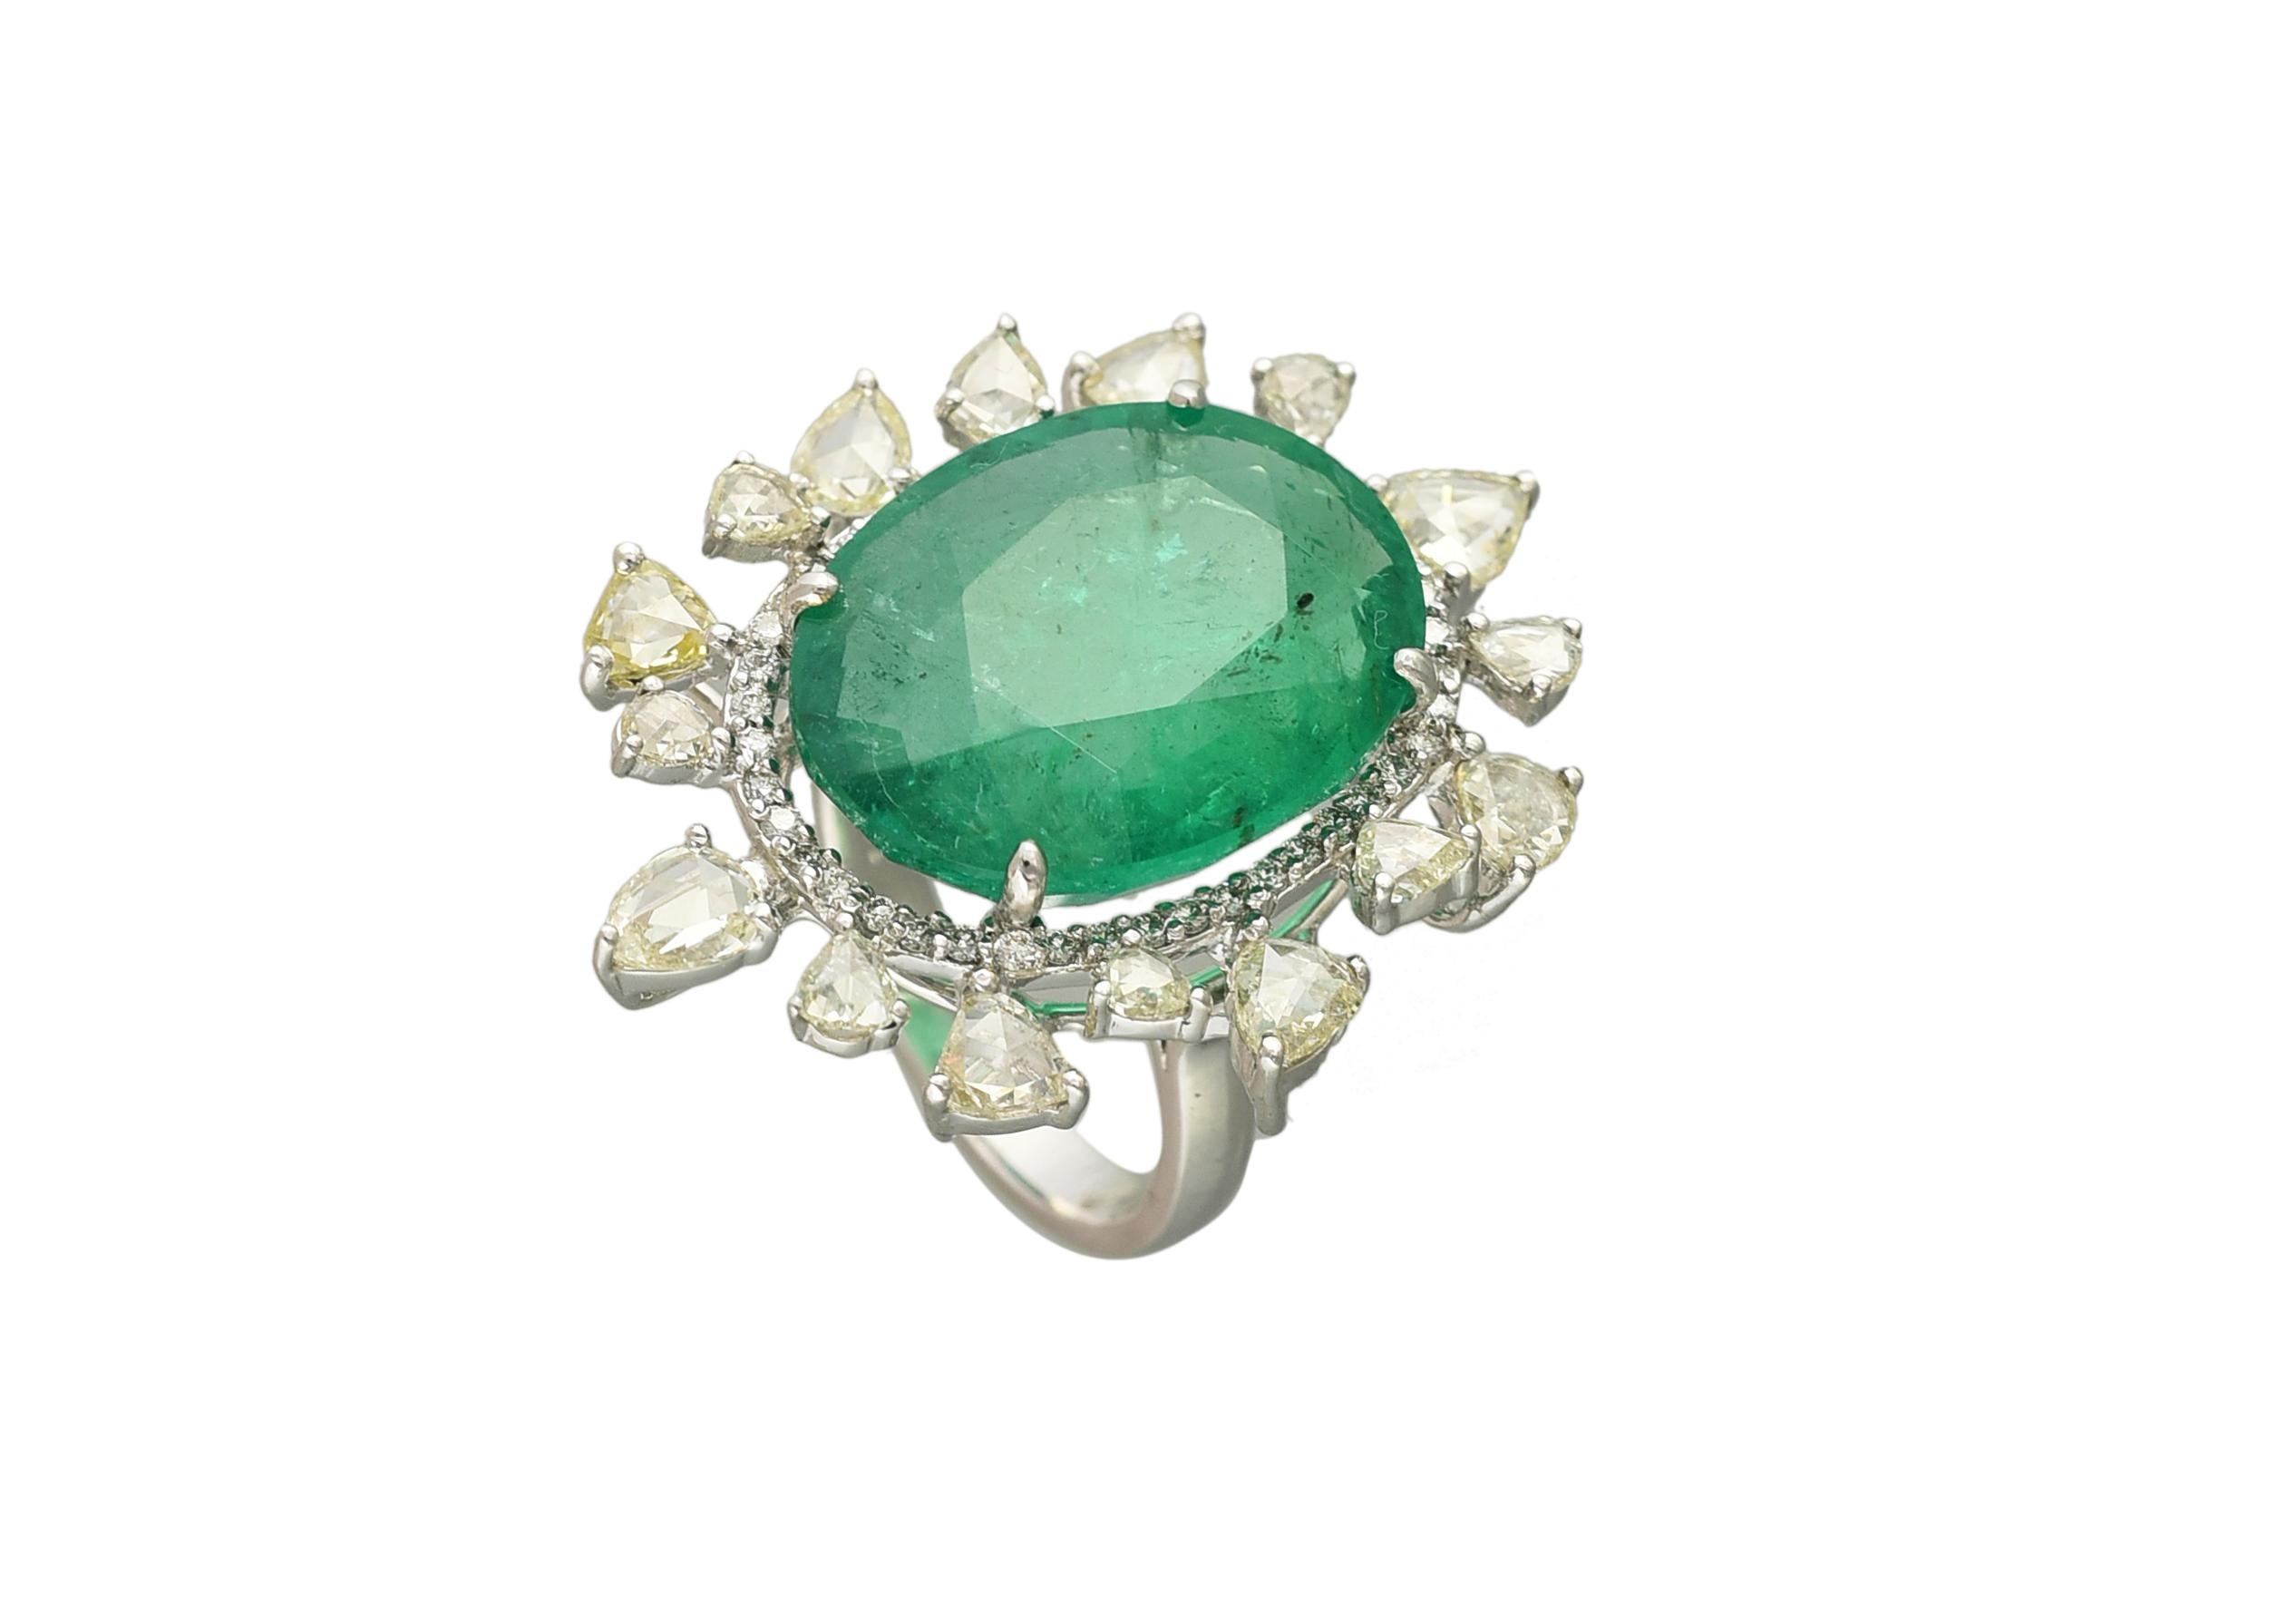 A very gorgeous Emerald and Rose Cut Diamond cocktail ring set in 18K white gold. The emerald is natural and weighs 13.70 carats. The weight of the Rose Cut Diamonds is 2.65 carats. The ring is made in Indian ring size 12 (US size 6), and can be